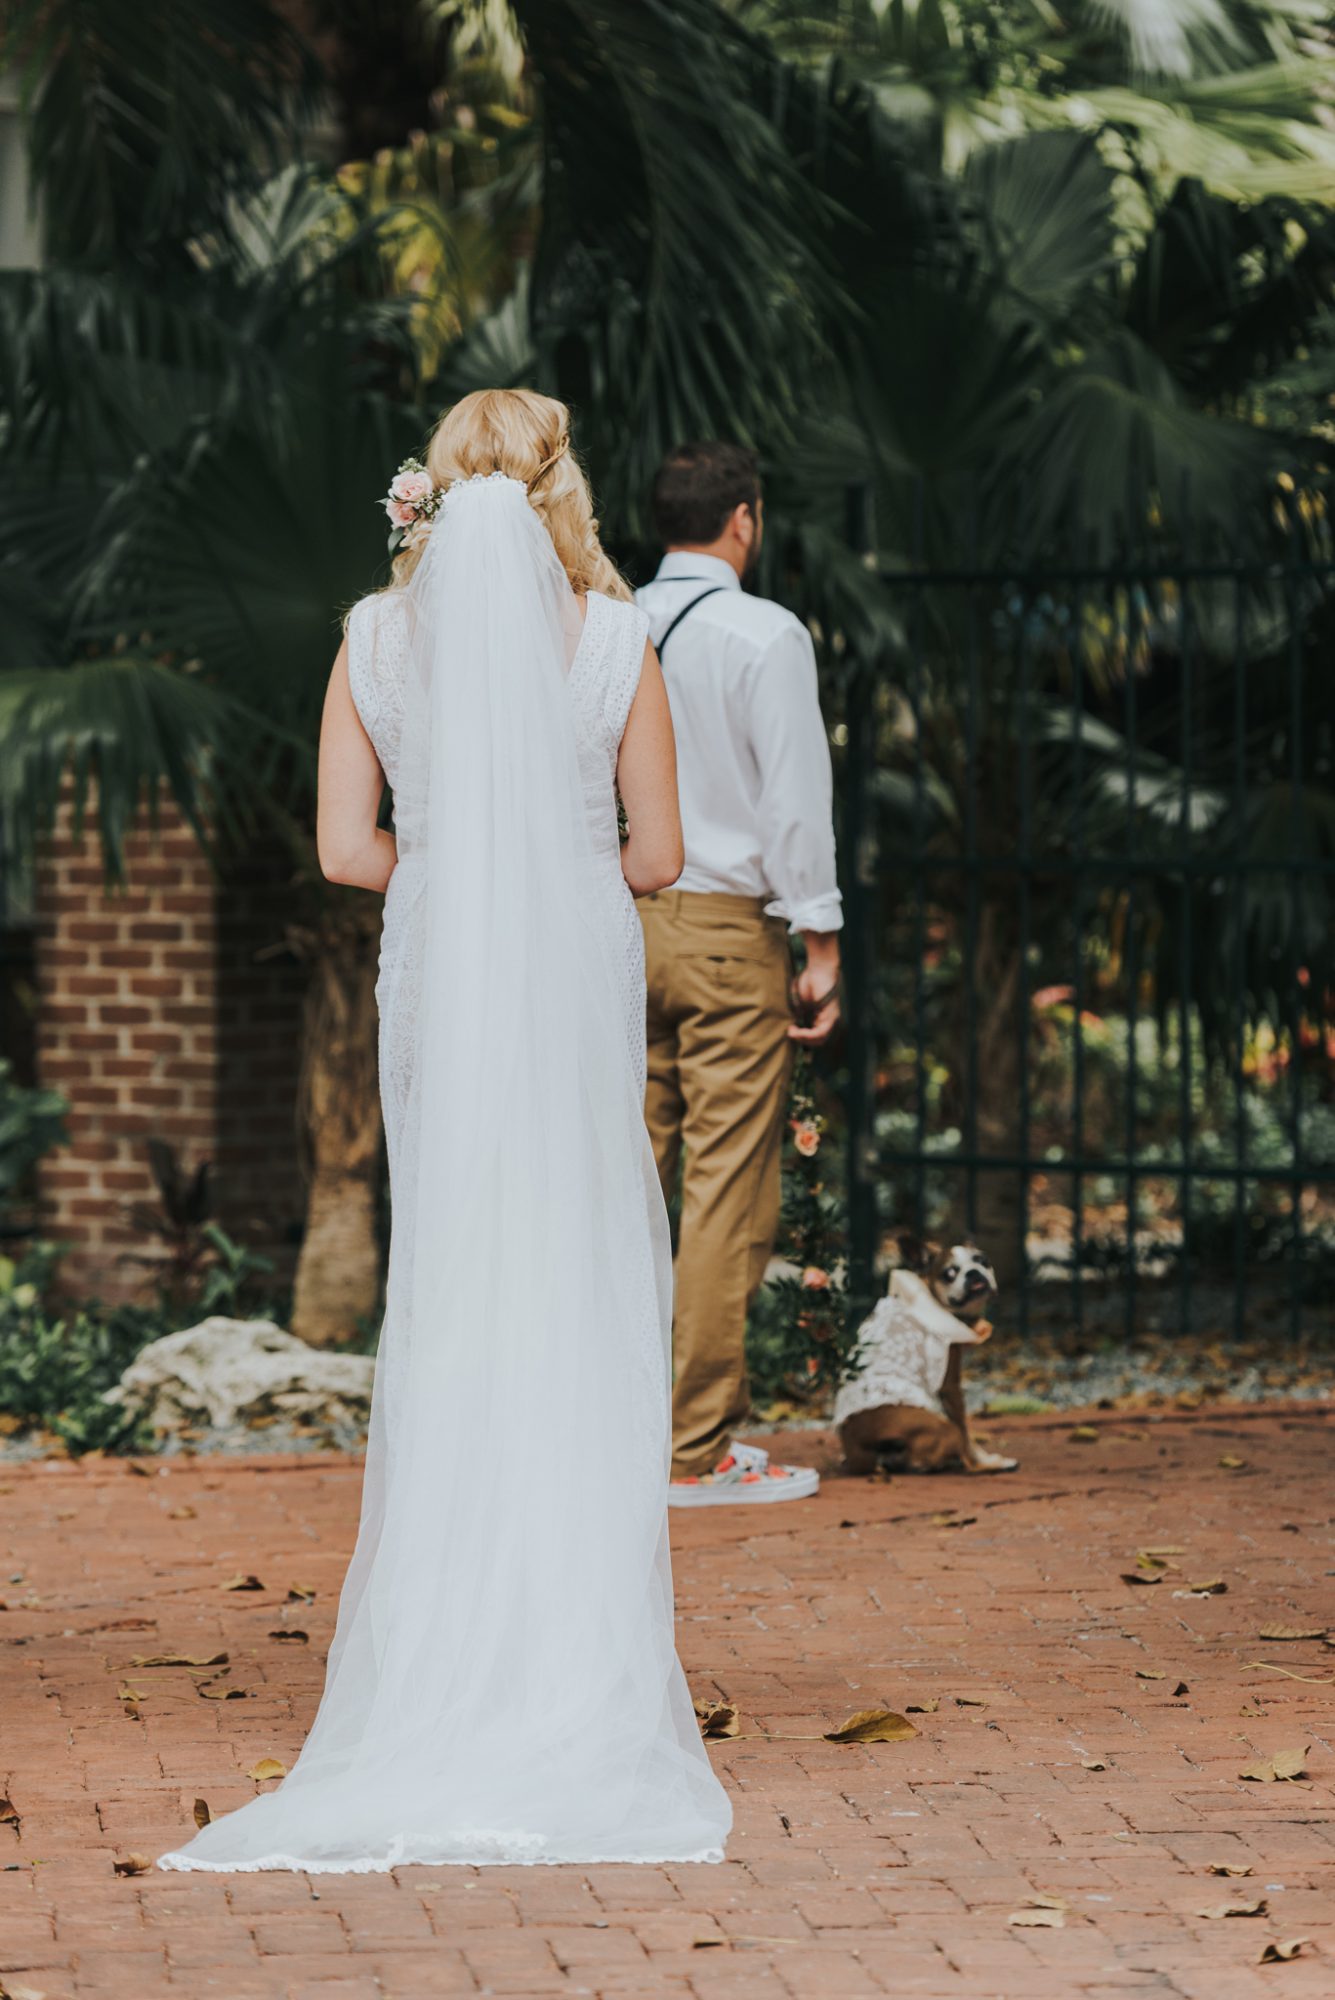 Amy and Teddy, a bride and groom, walking down a brick walkway at their Key West wedding.